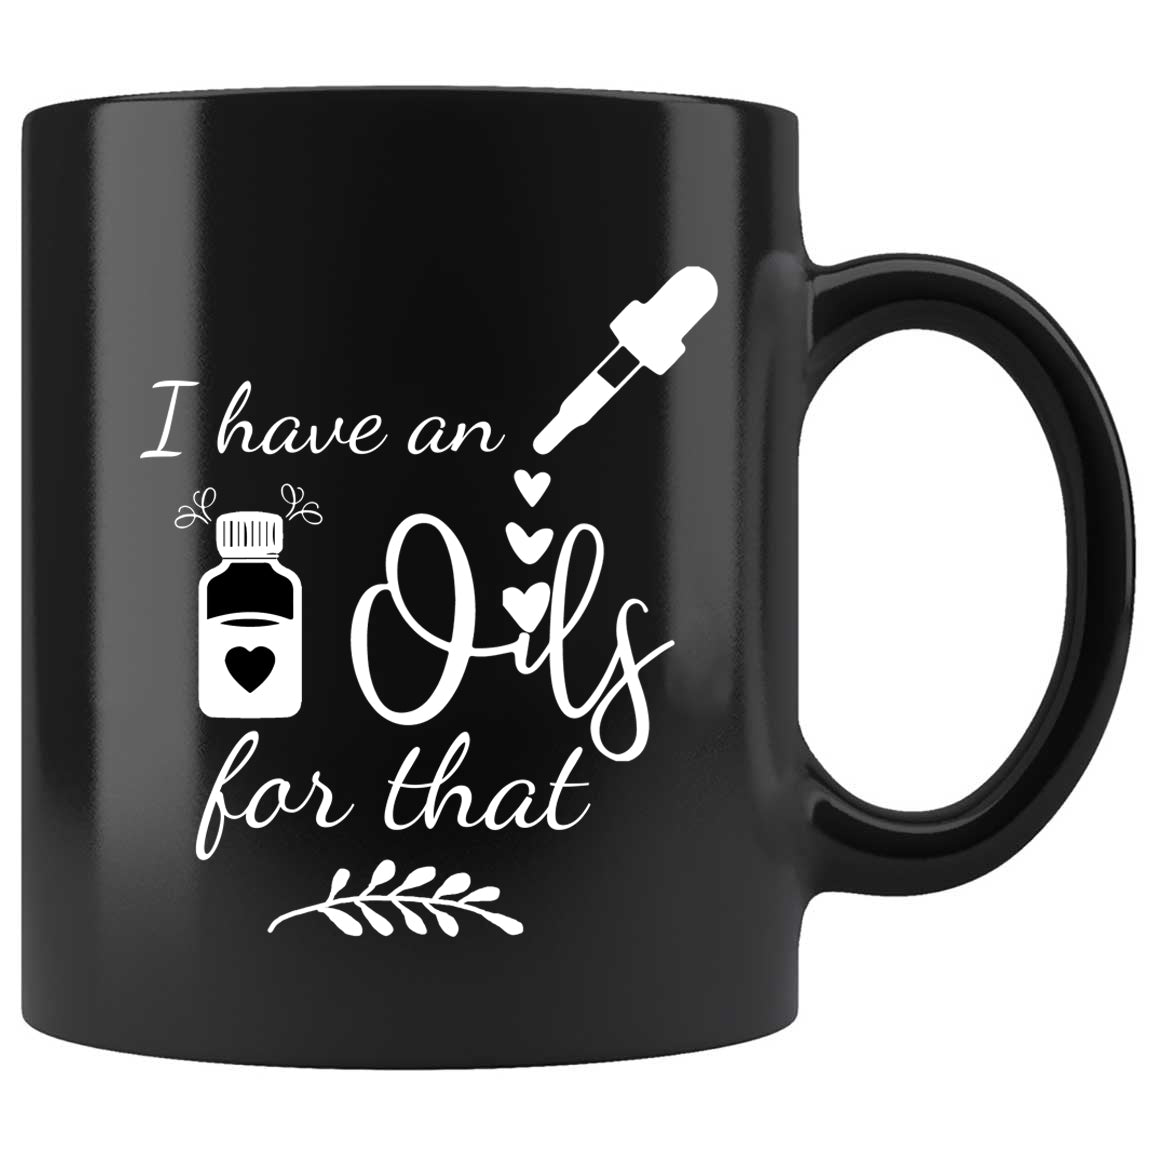 I Have An Oil For That Skitongifts Funny Ceramic Coffee Mug For Birthday, Mother's Day, Father's Day, Christmas